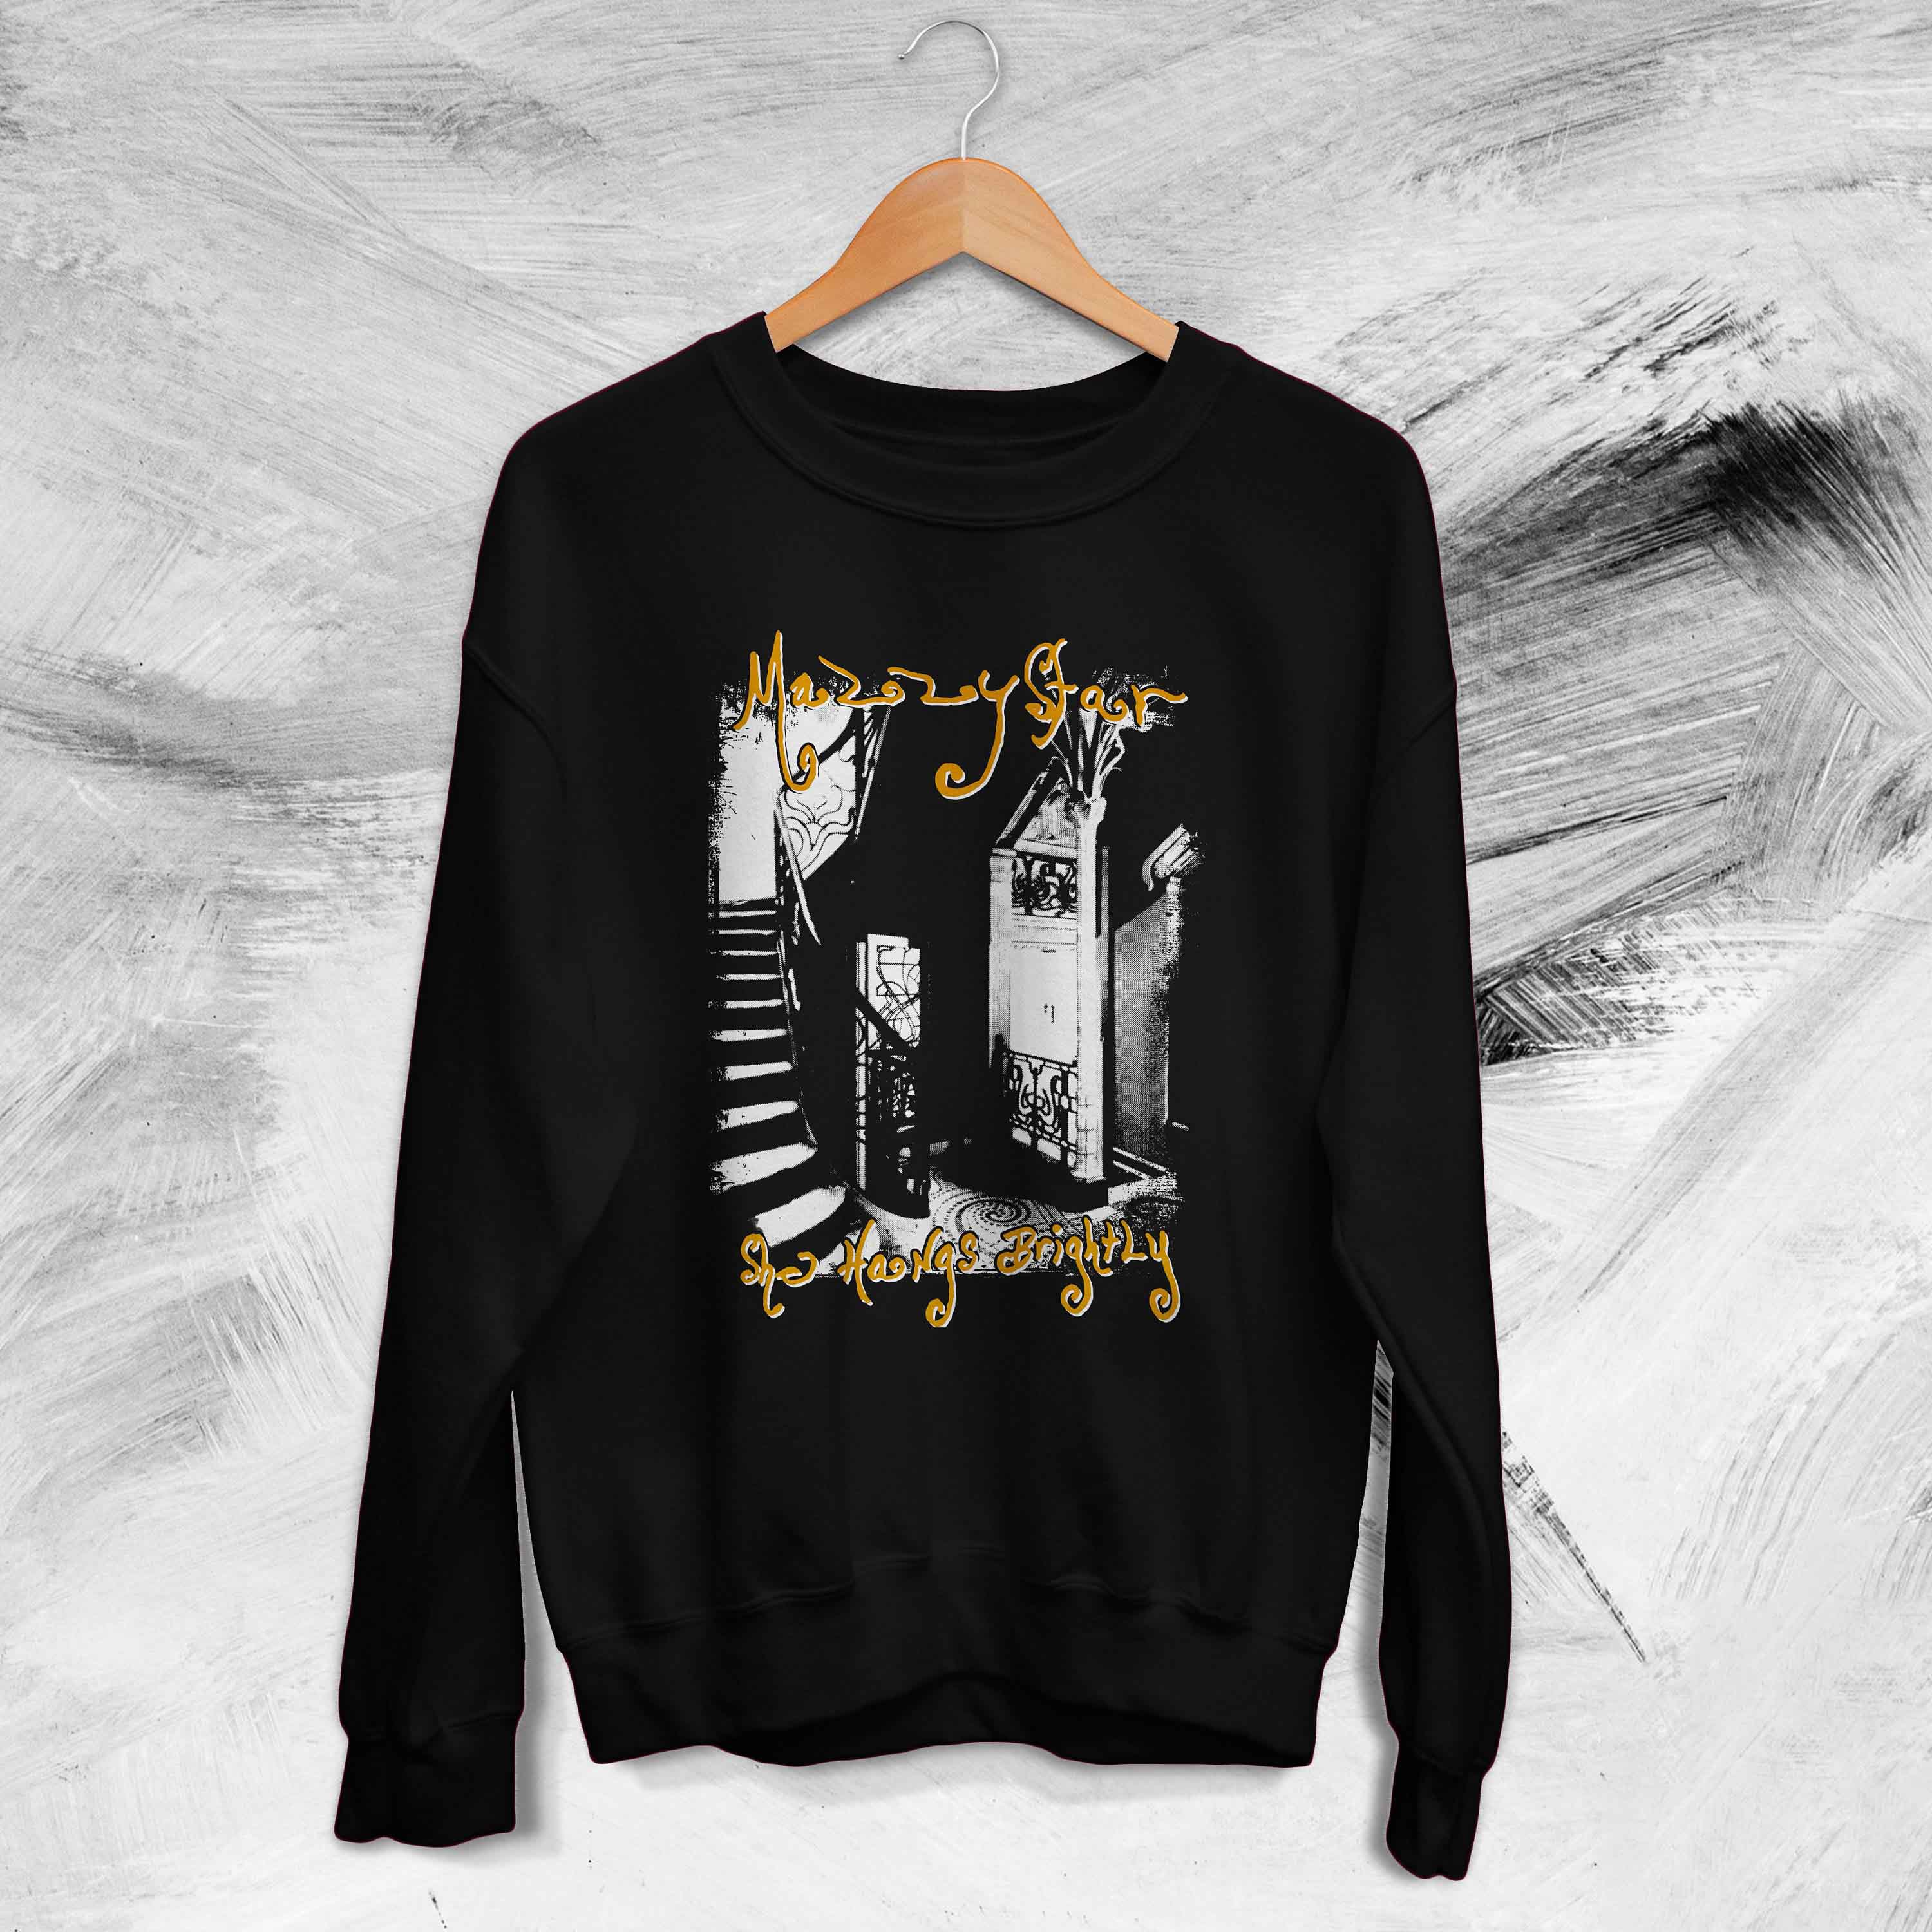 Mazzy Star She Hangs Brightly 1990 Vintage Band Rock Music Gift Music Lovers Unisex Sweatshirt